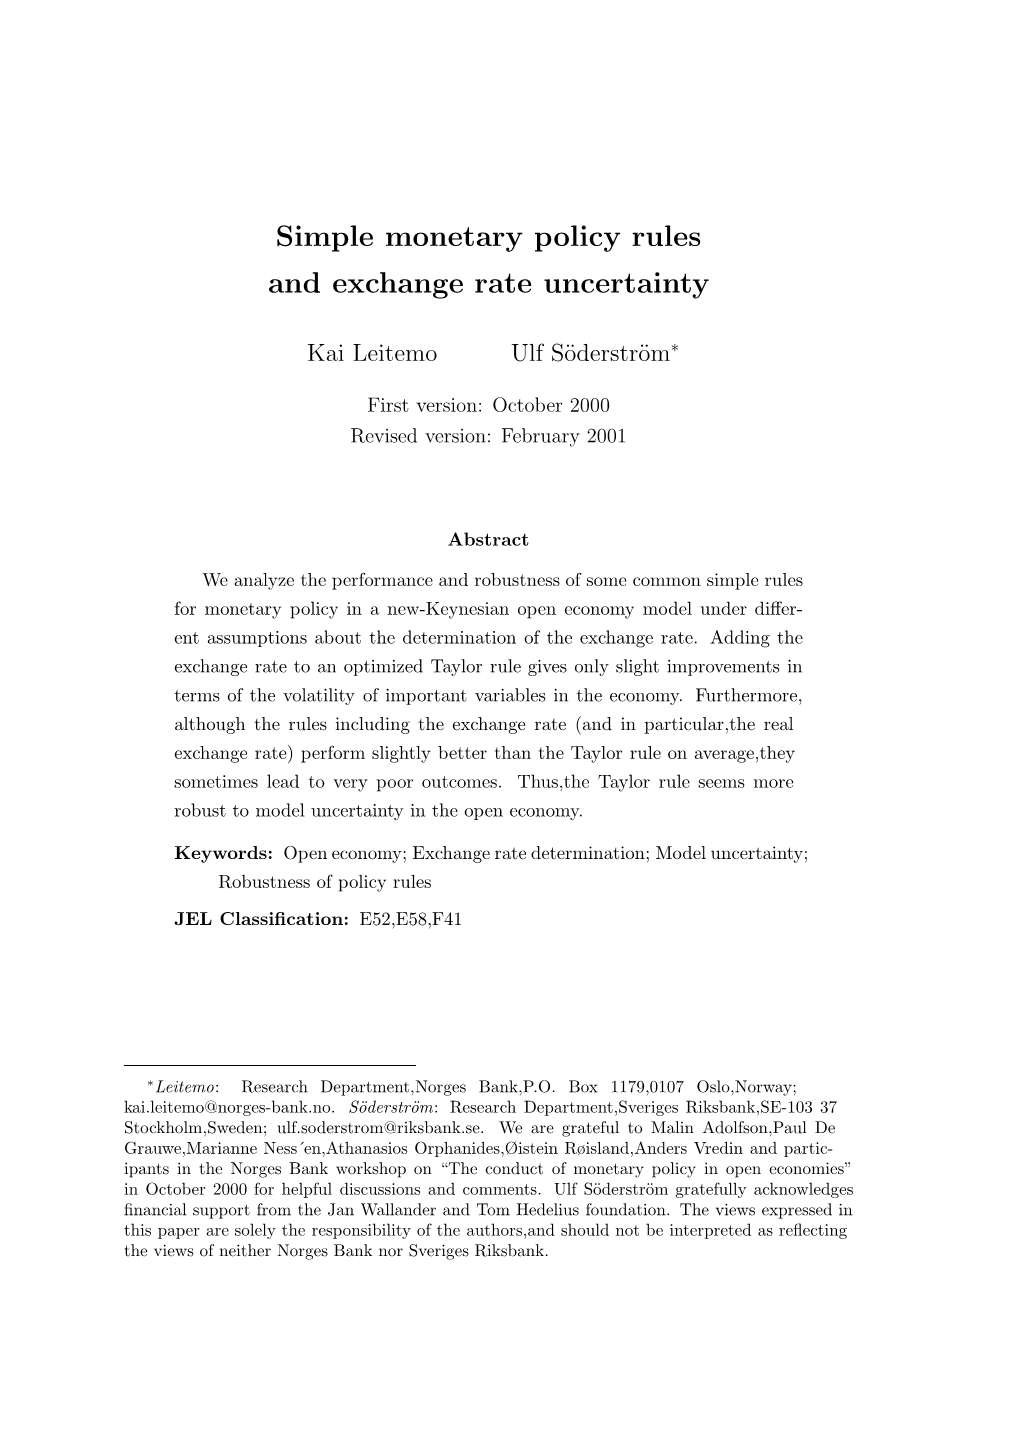 Simple Monetary Policy Rules and Exchange Rate Uncertainty